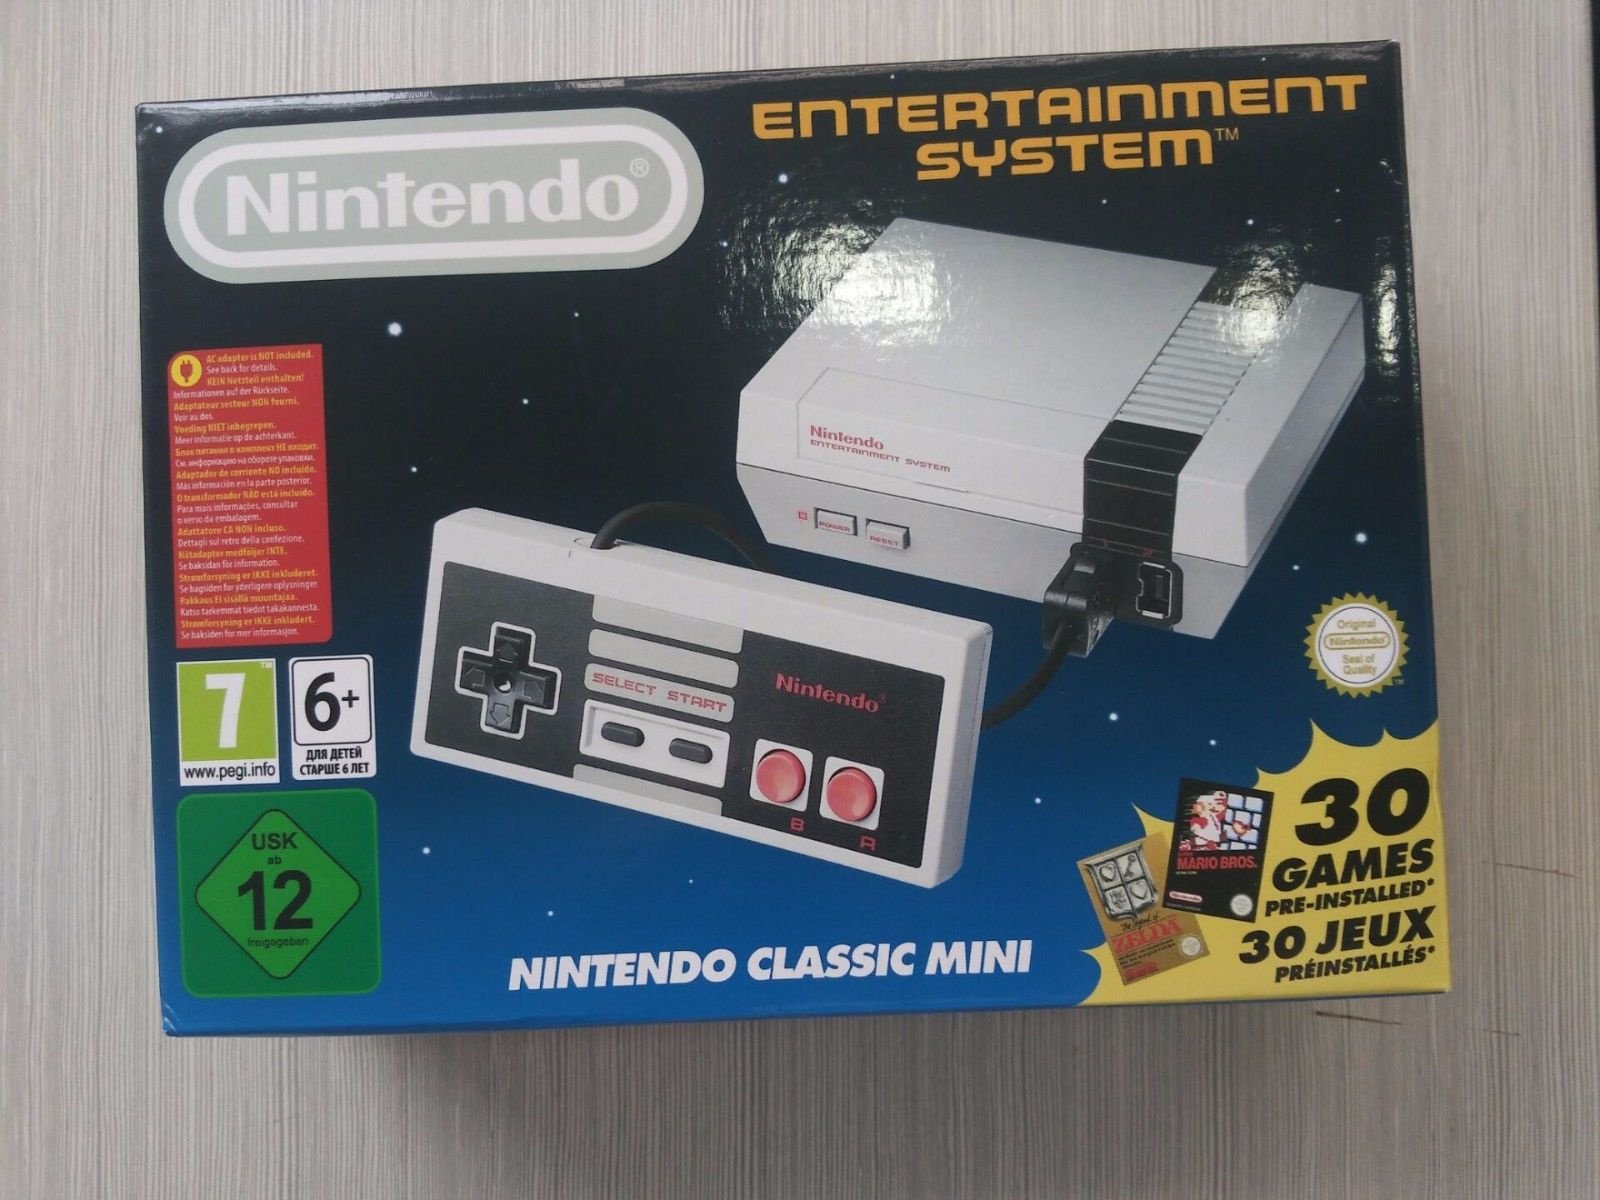 http://images.nintendolife.com/news/2017/07/warning_fake_nes_mini_consoles_spotted_on_the_web/attachment/0/original.jpg